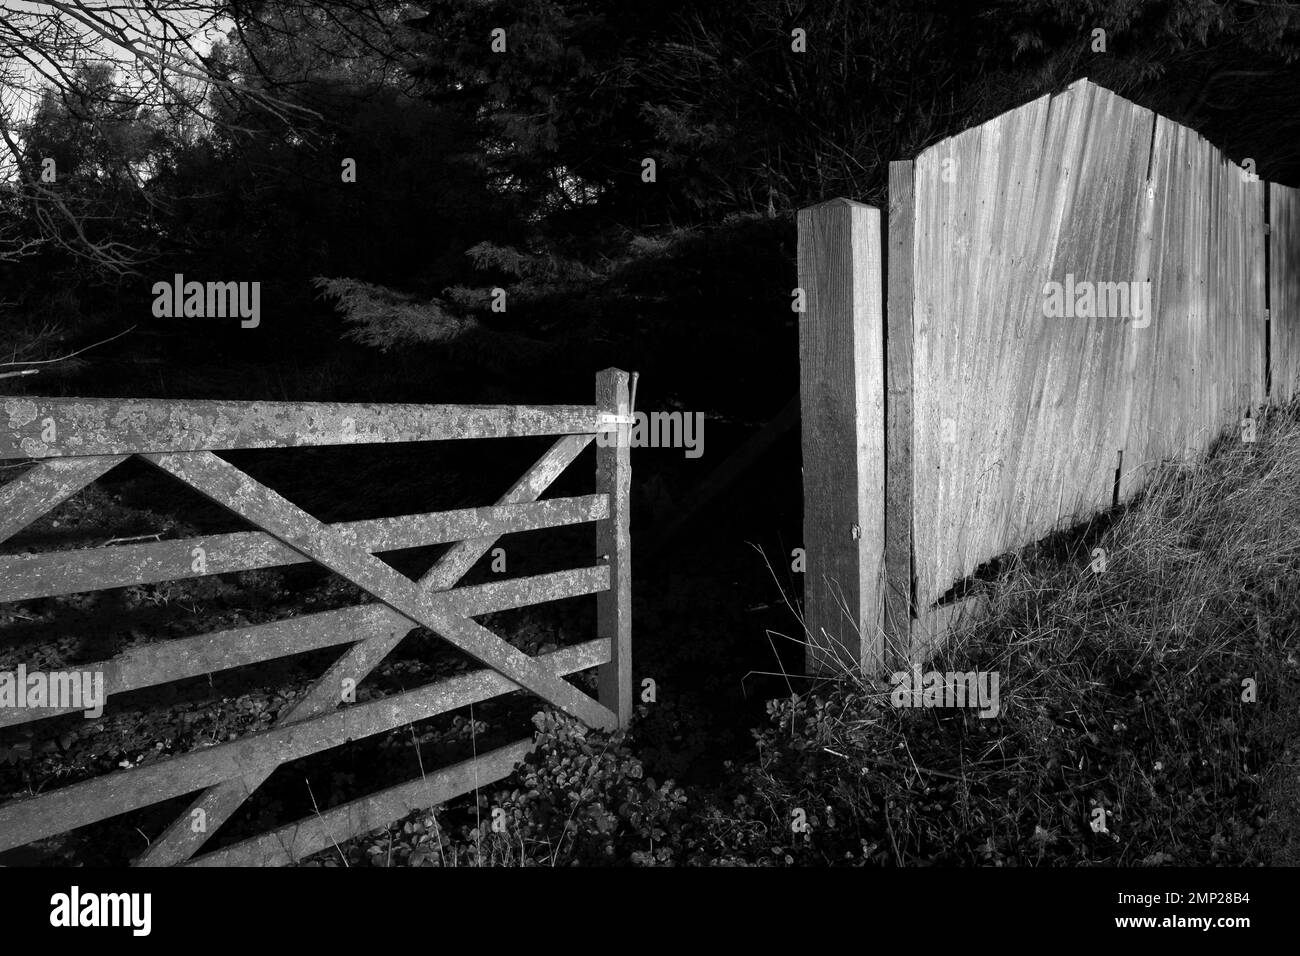 Five bared wooden gate Stock Photo